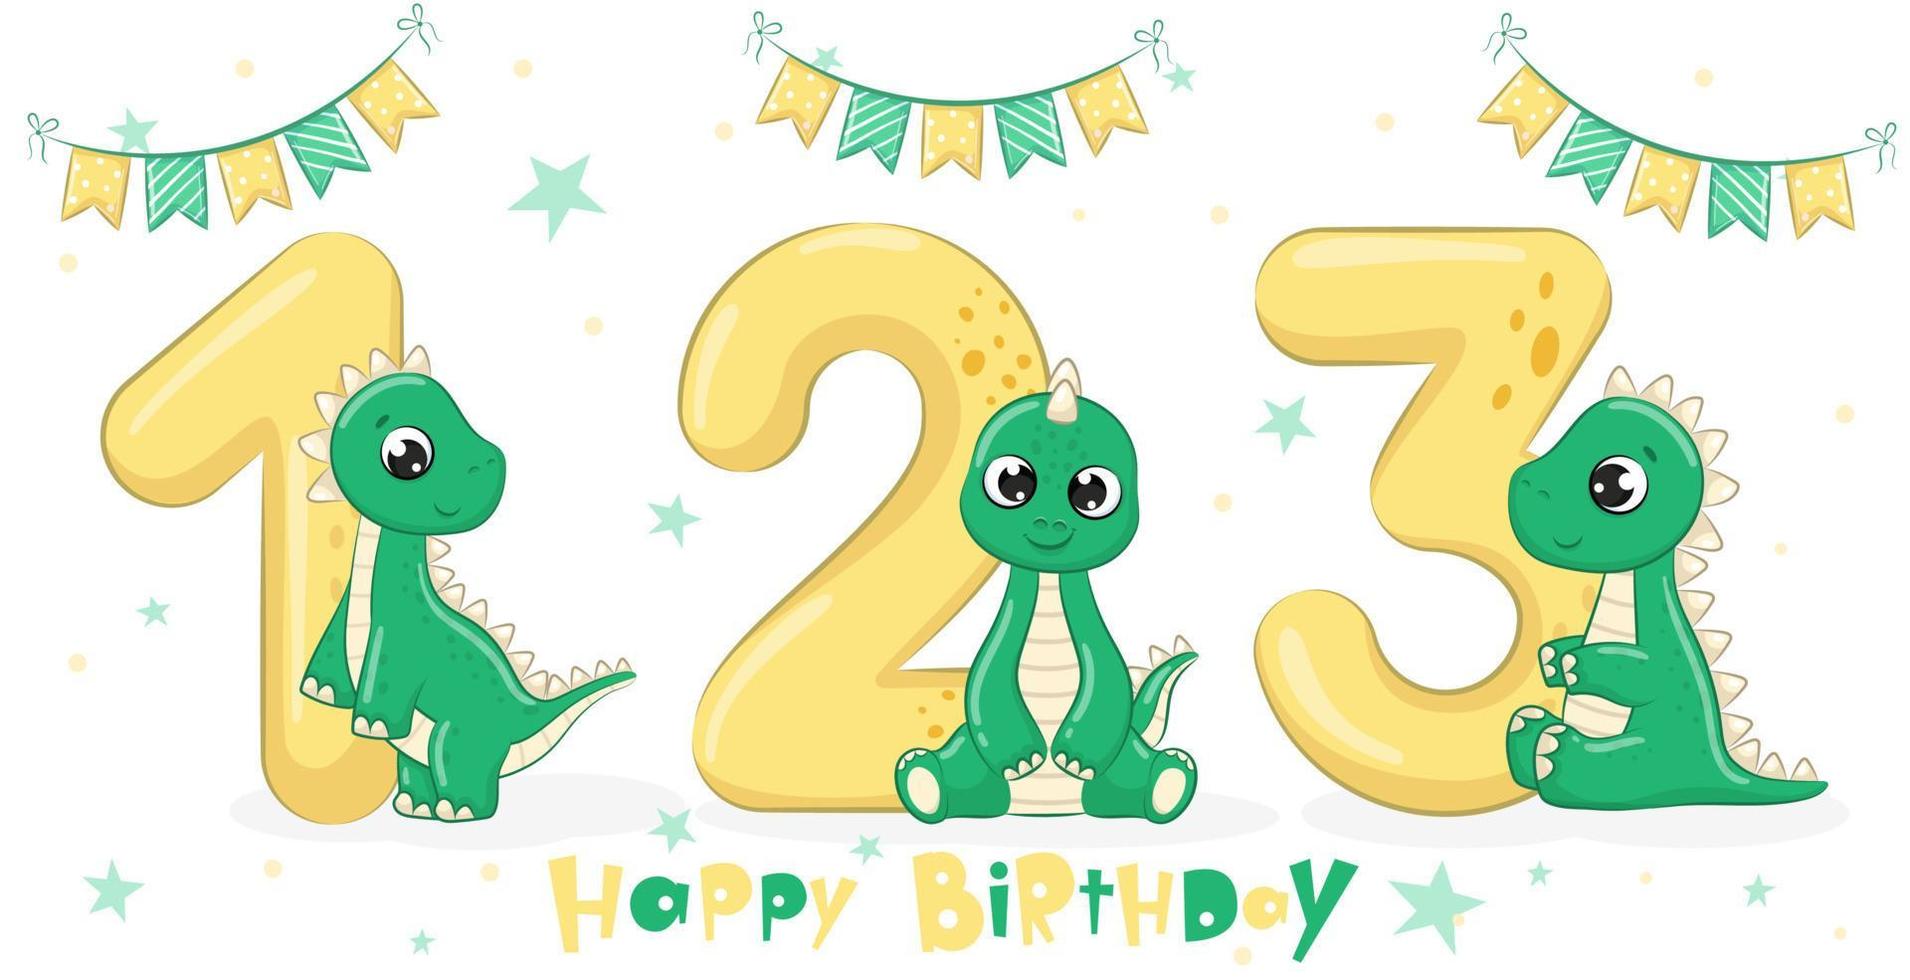 Collection of 3 cute green dinosaurs - Happy birthday, 1,2,3 years. Vector illustration of a cartoon.